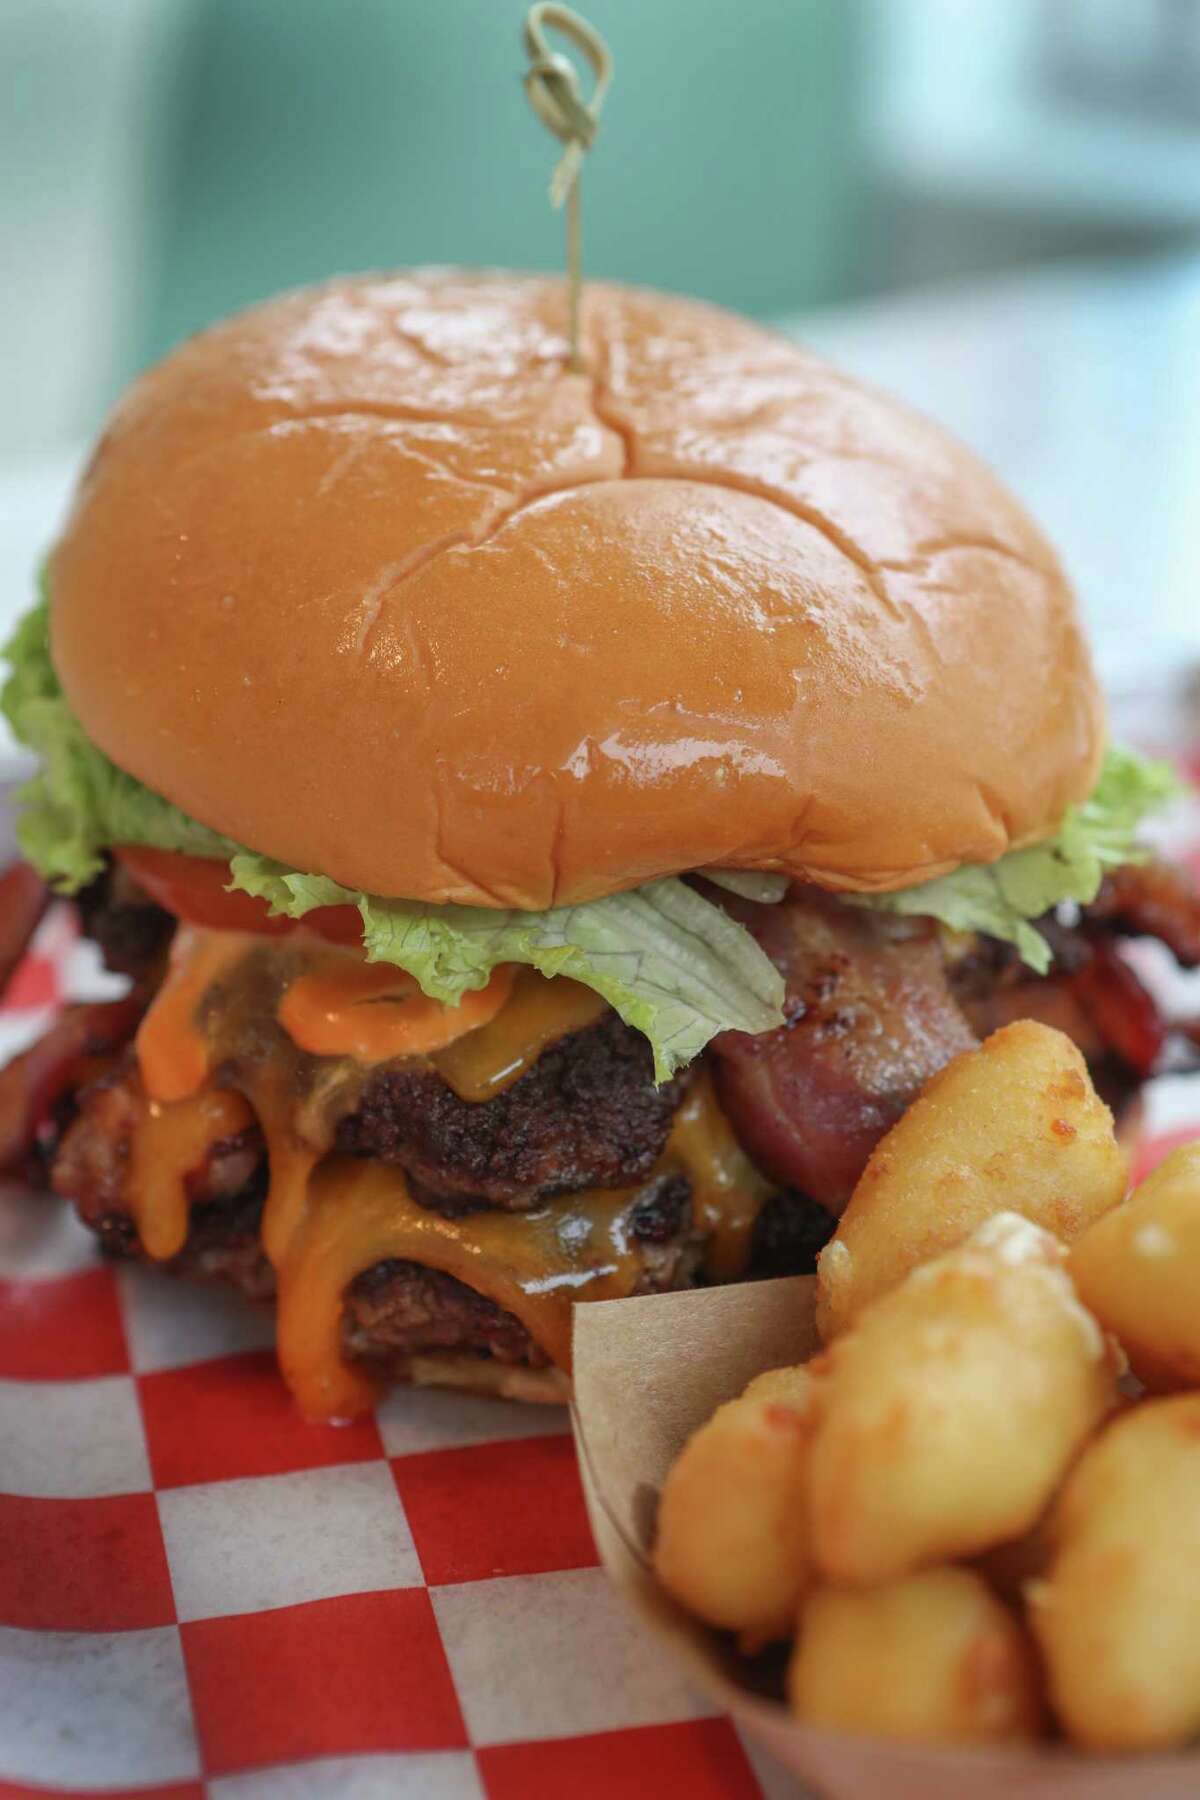 The #99 burger with cheese curds at Killen's Burgers